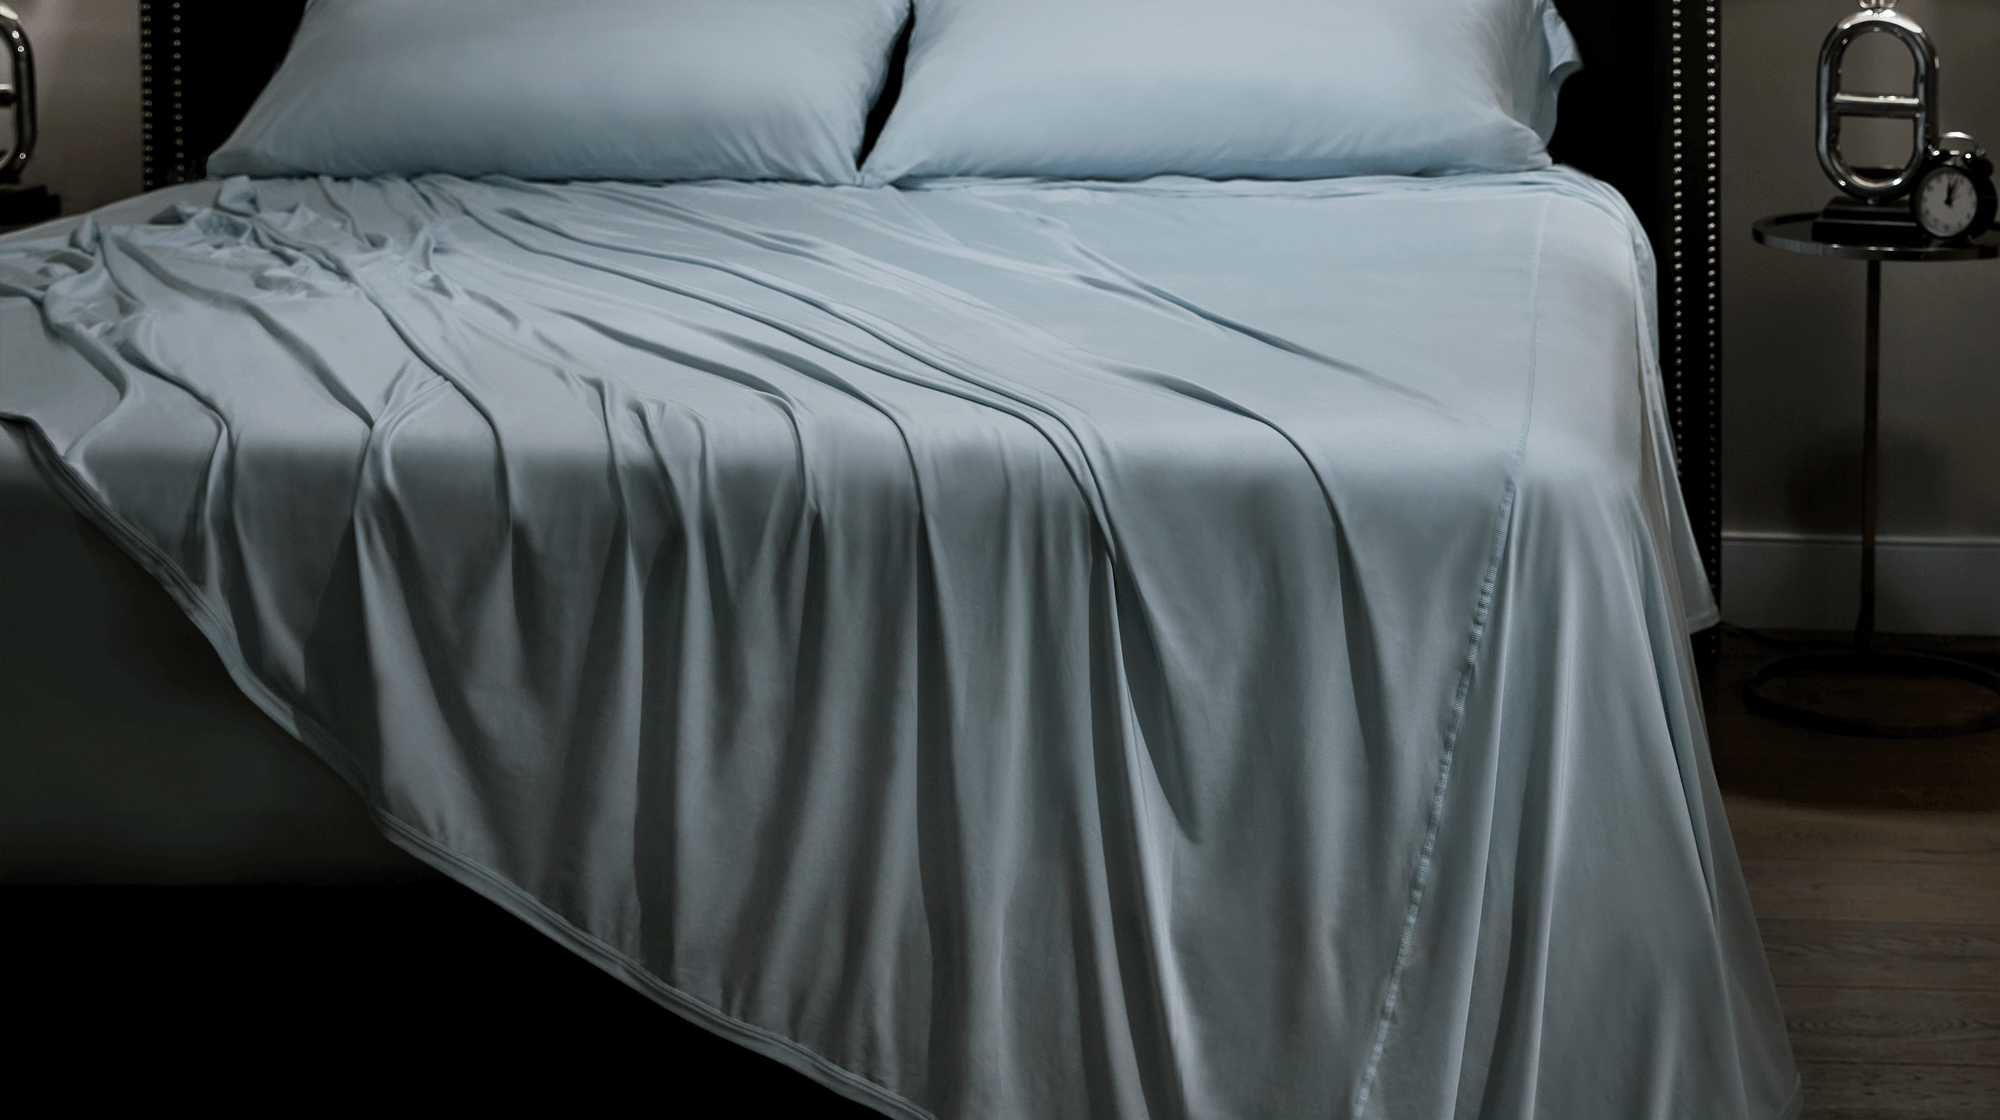 Sheets for Night Sweats